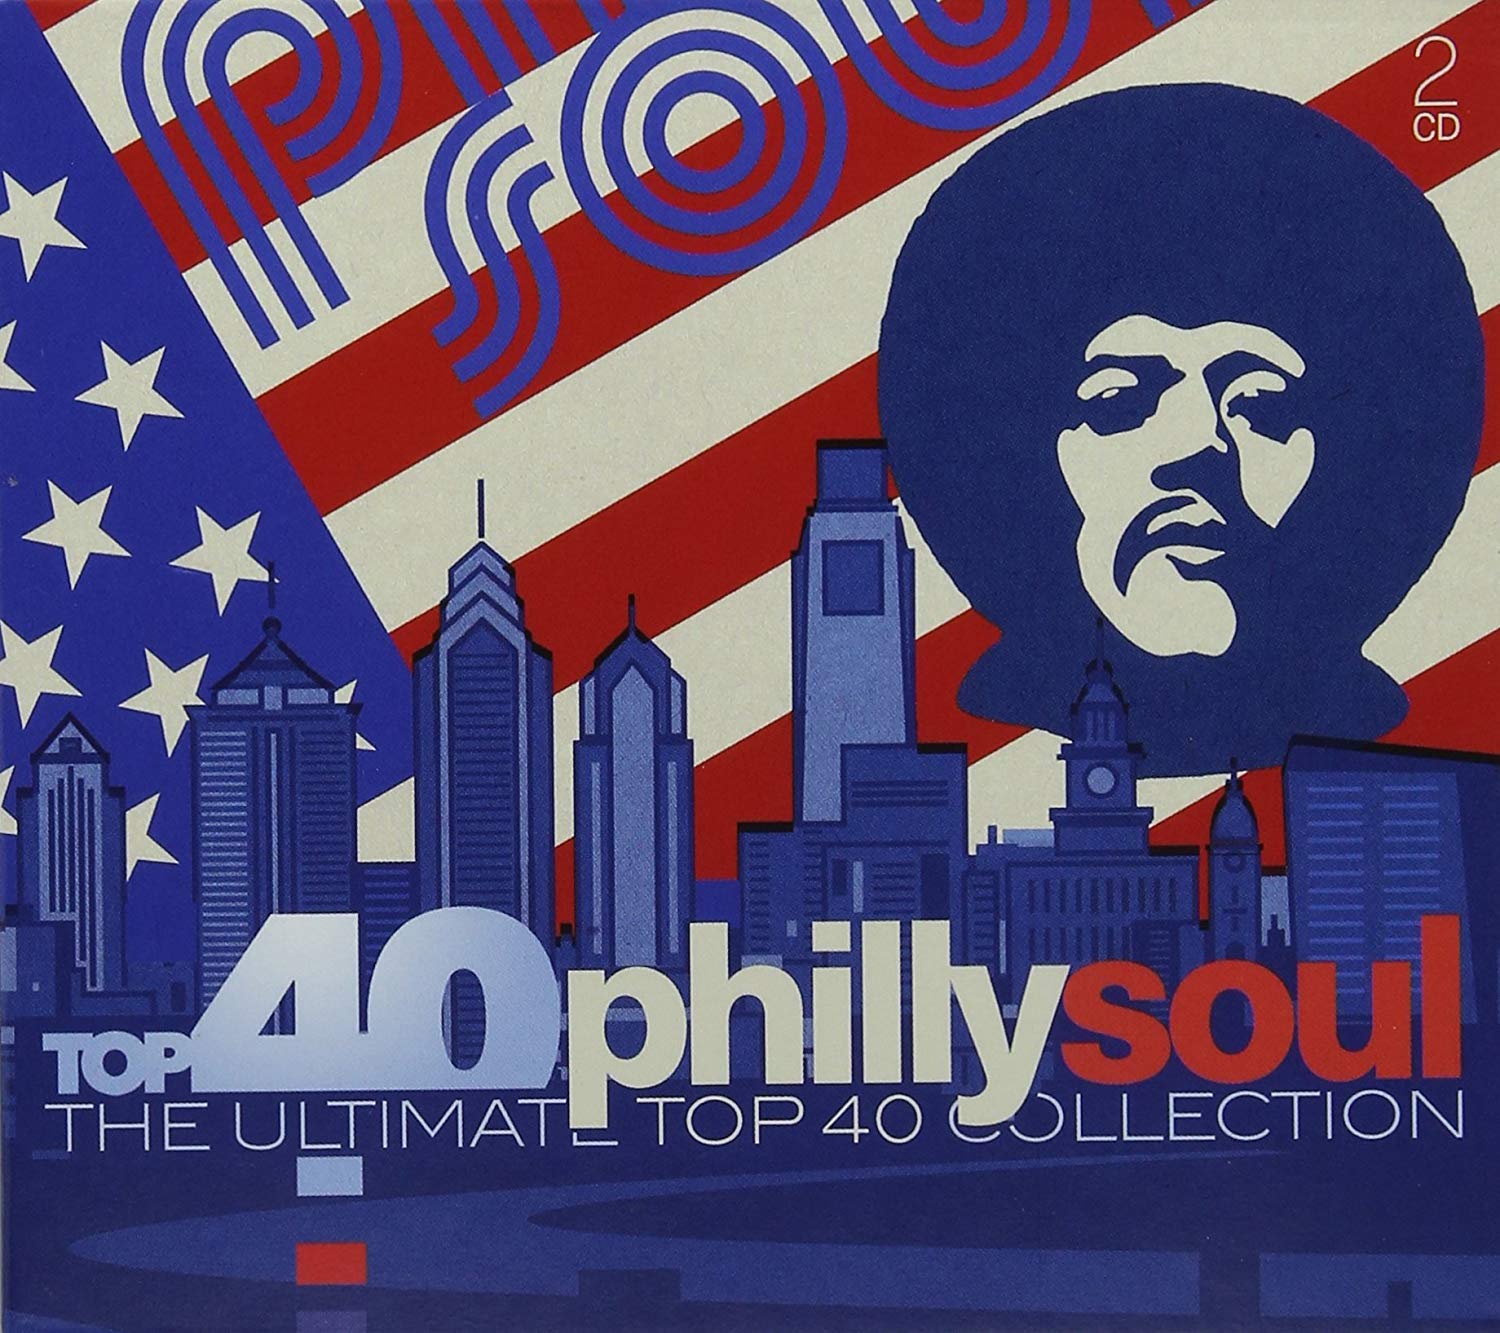 Top 40 Philly Soul - The Ultimate Top 40 Collection